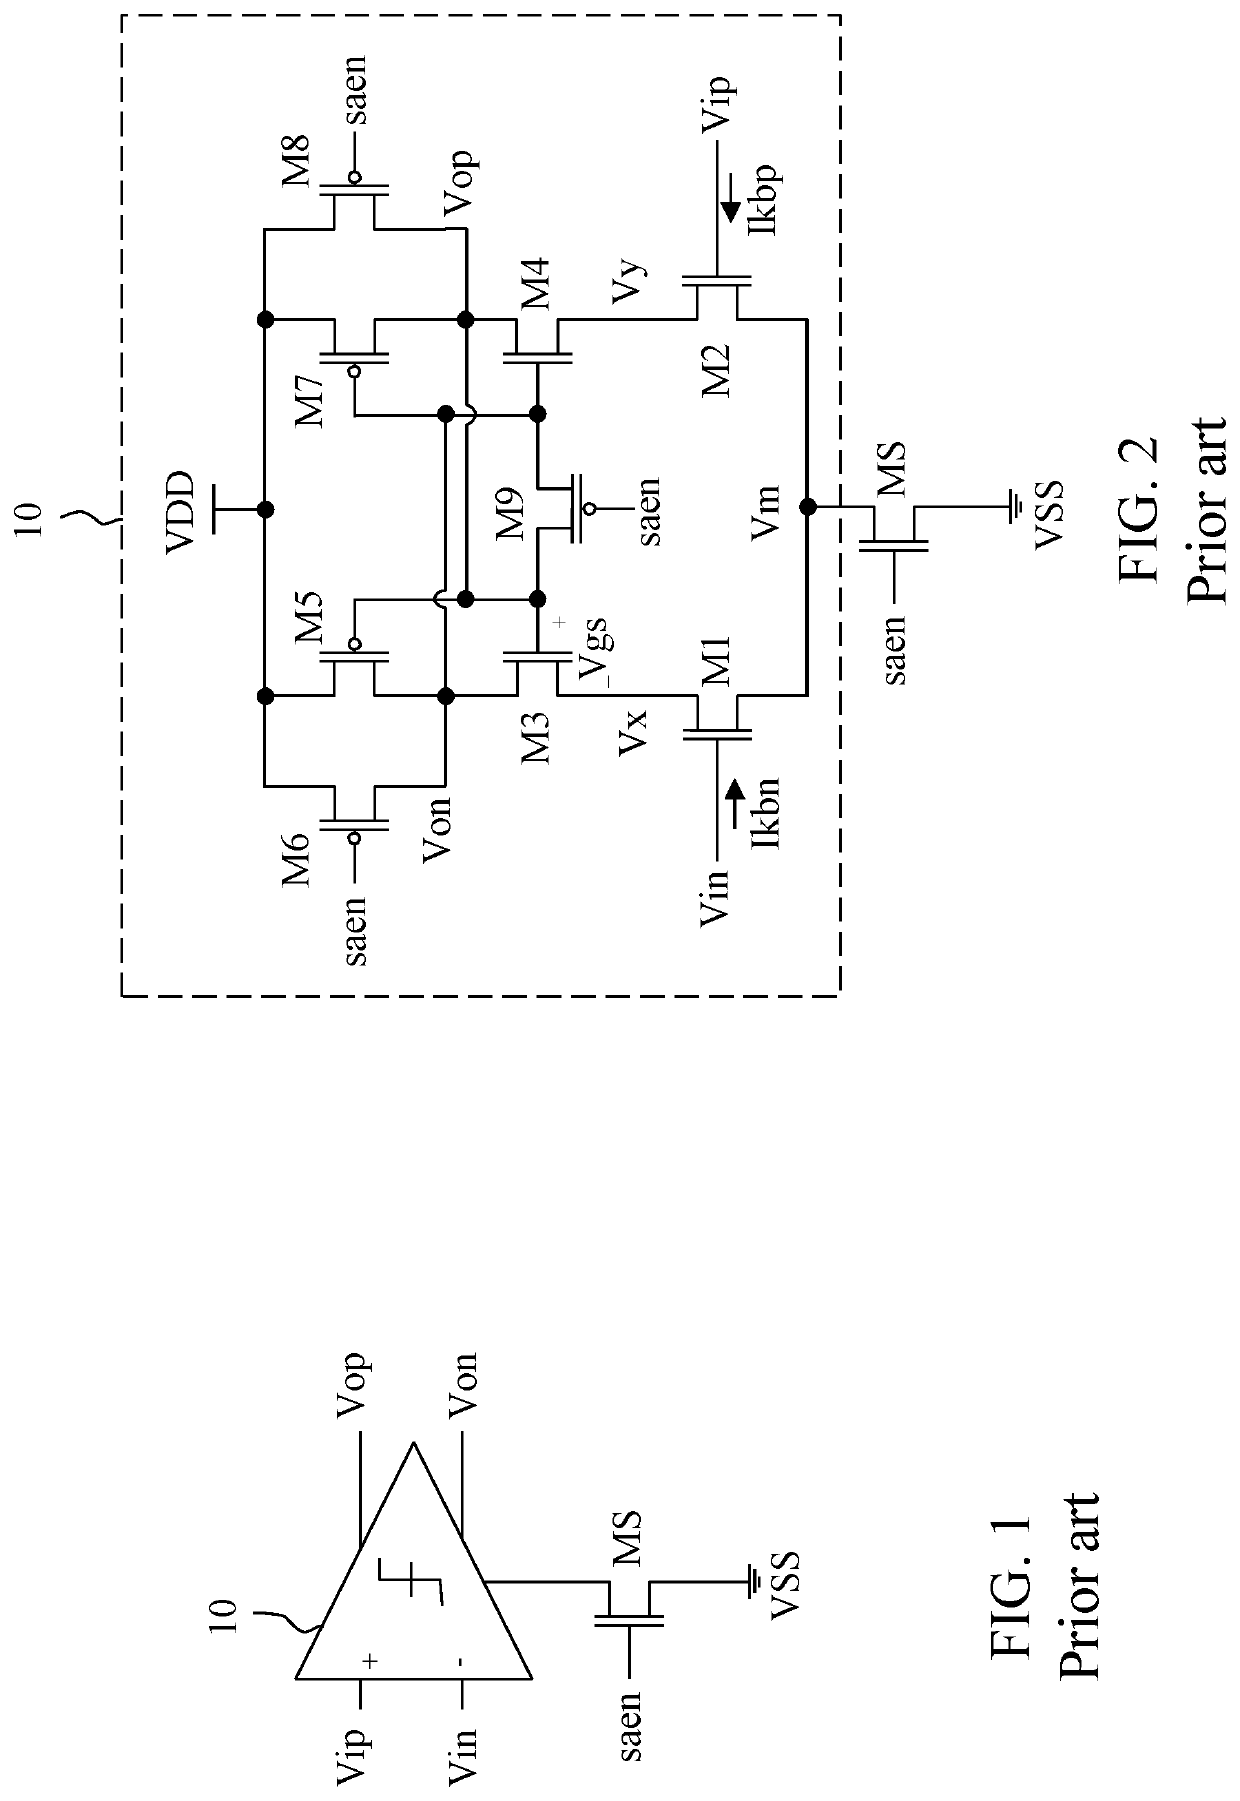 Comparator circuit with low power consumption and low kickback noise